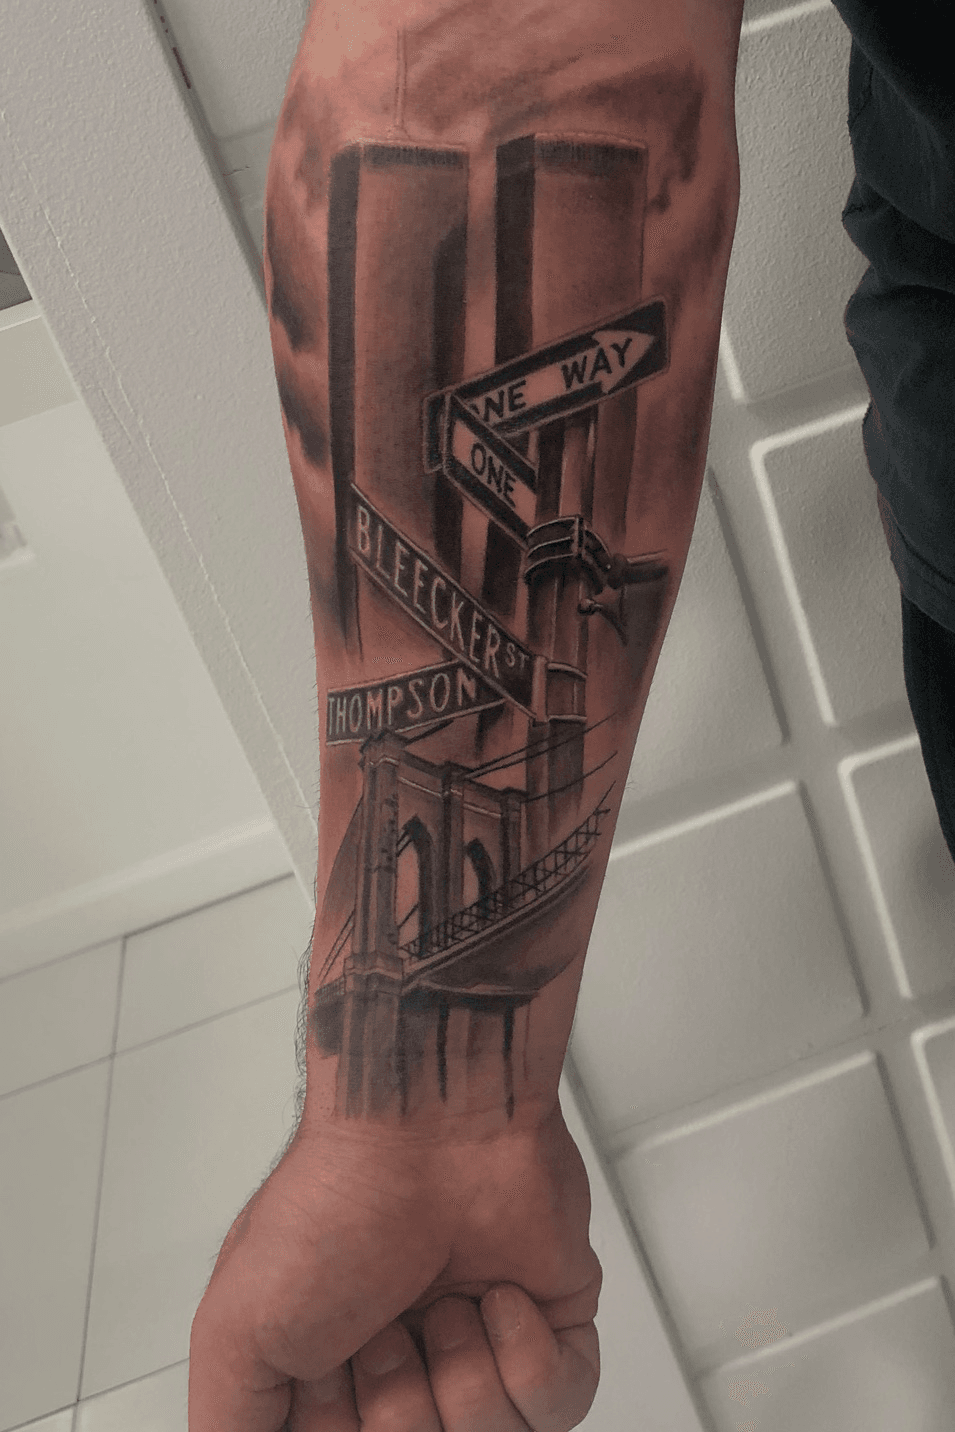 1st tattoo second session Everything shaded black Done by Oliver Peck at  Elm Street Tattoo in Dallas Texas Next sesh on Nov 19th then posting pics  of the finished Tat 4 pics